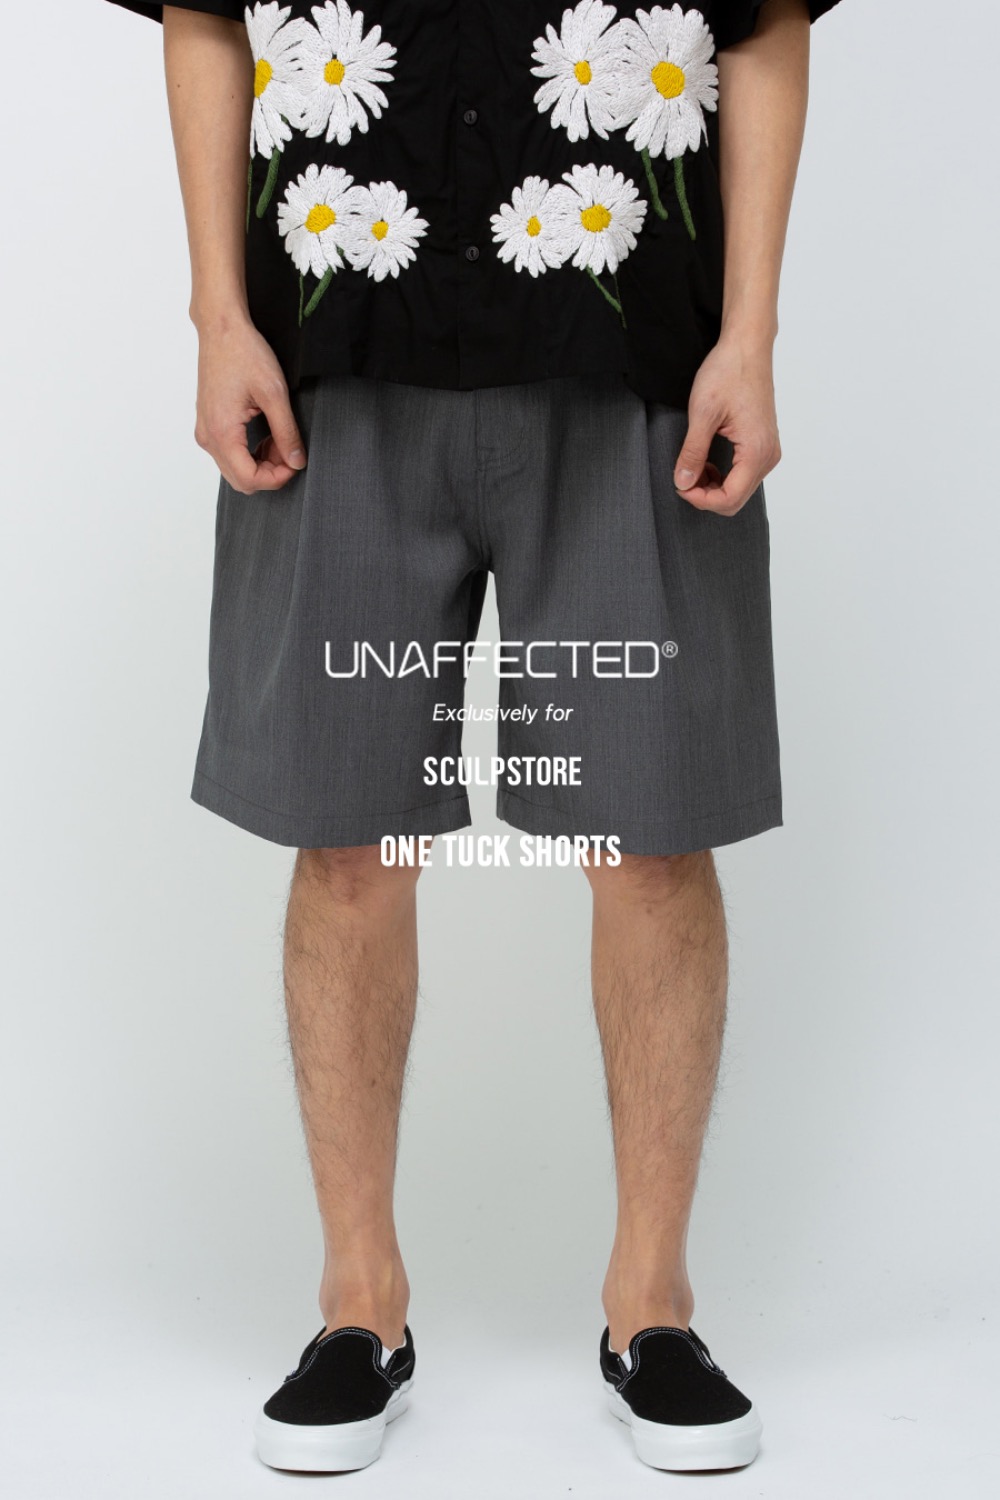 (EXCLUSIVE) ONE TUCK SHORTS